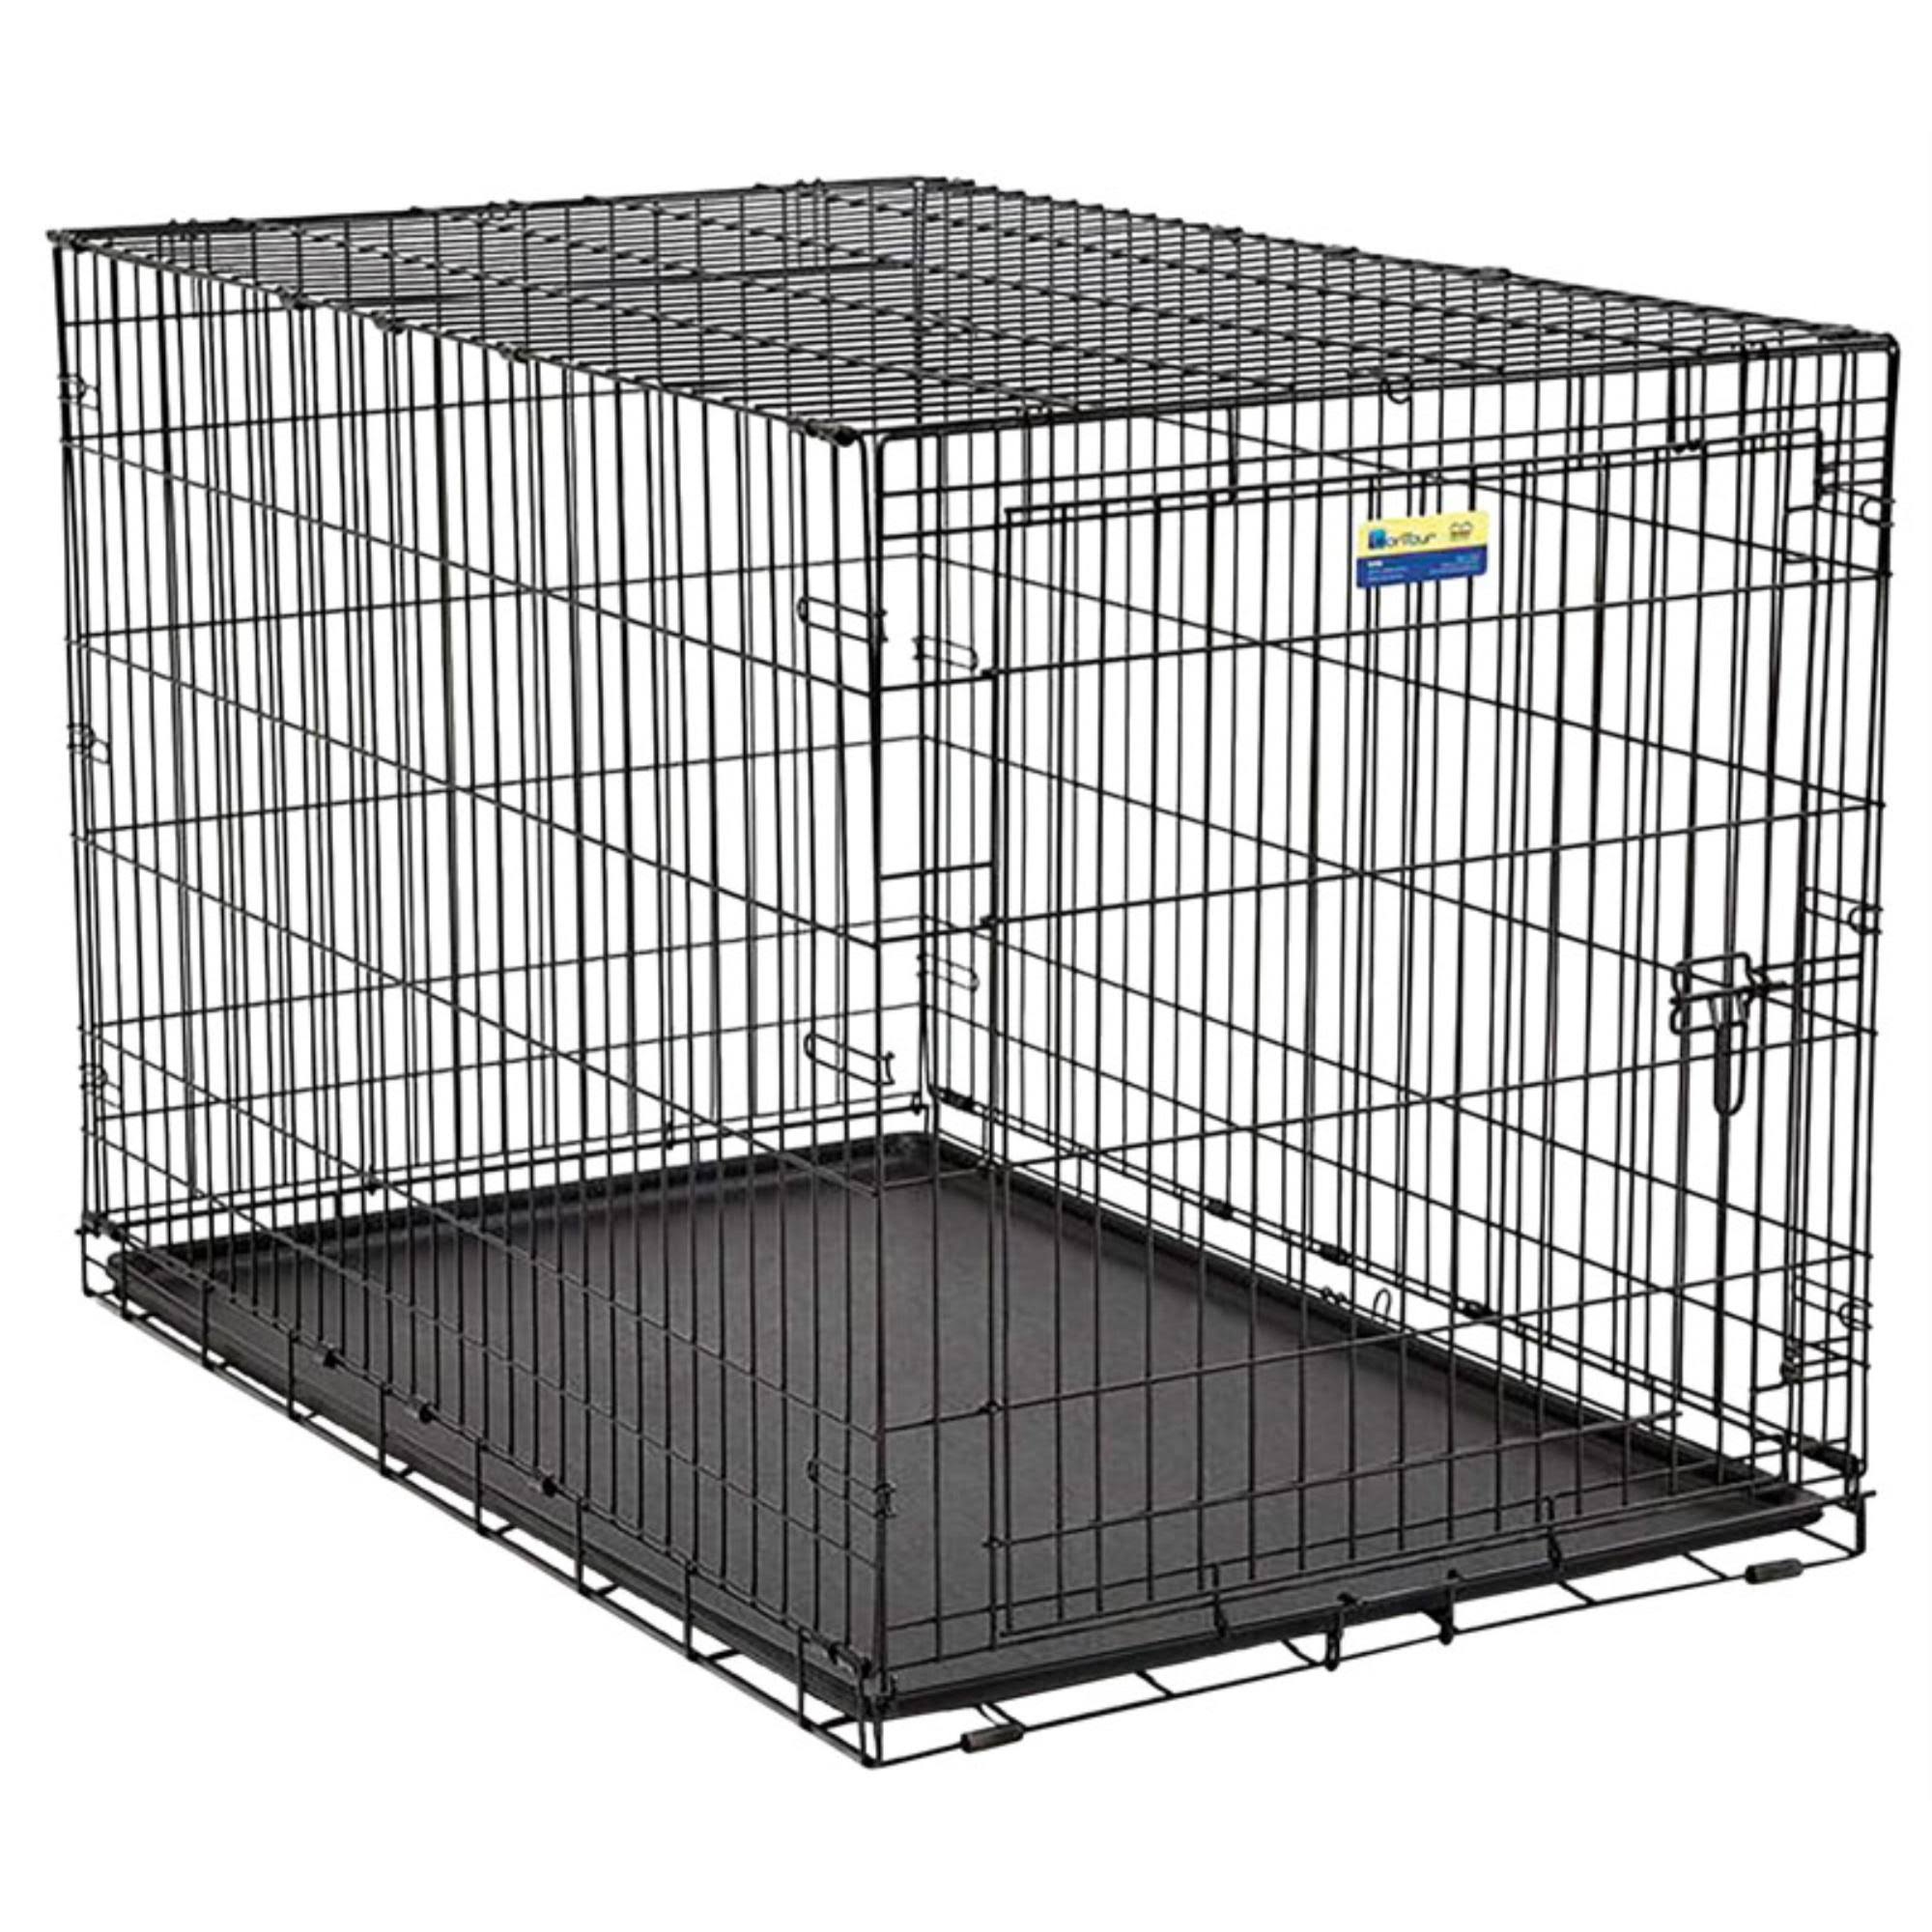 Midwest Metal Products Contour Single Door Dog Crate